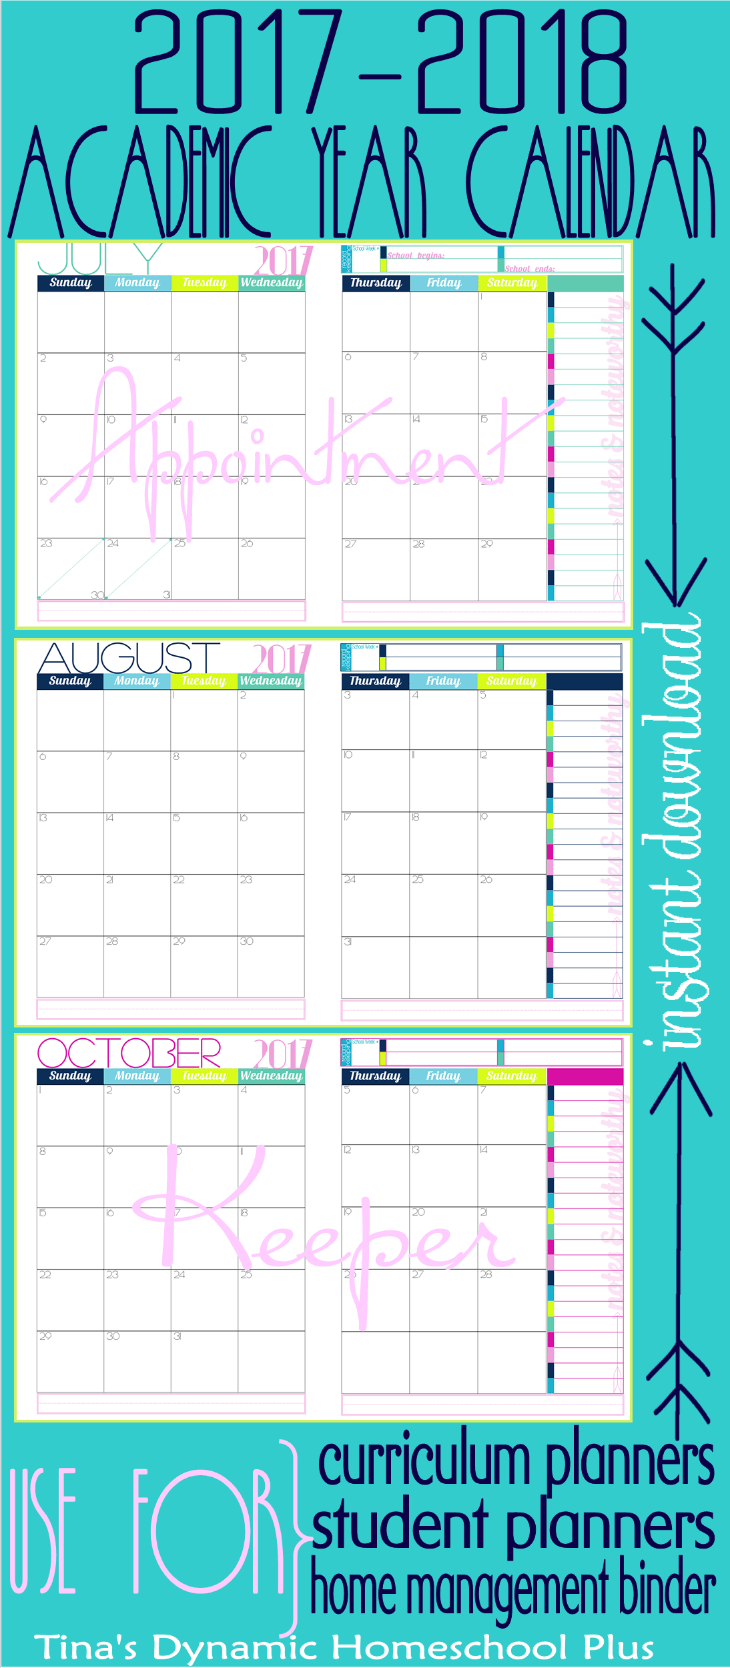 2017 to 2018 Academic Year Glamorous 2 Pages at a Glance @ Tina's Dynamic Homeschool Plus